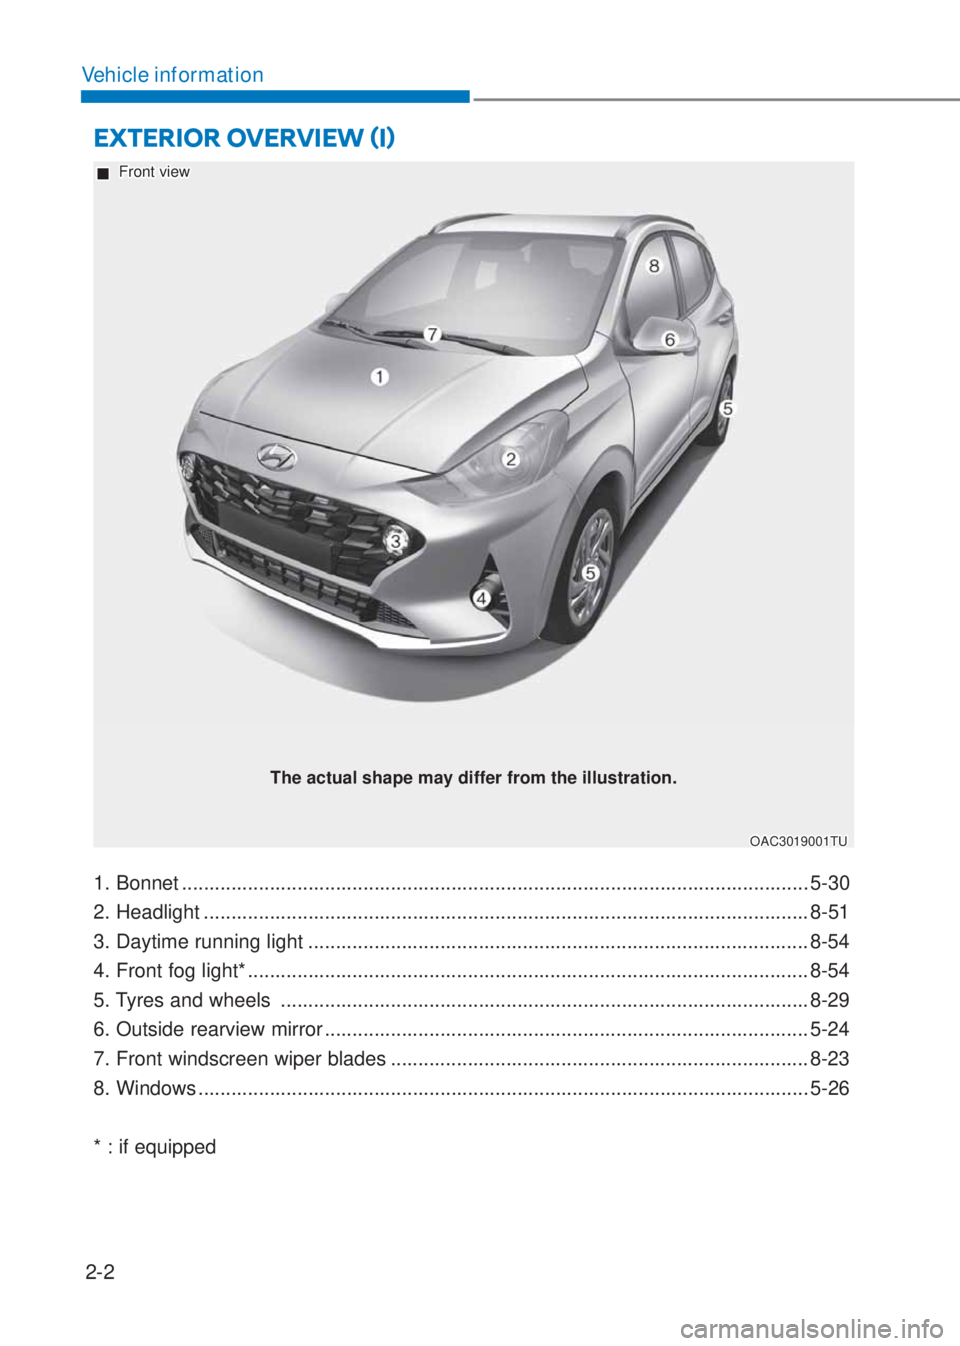 HYUNDAI I10 2022 User Guide 2-2
Vehicle information
E�;TERIOR OVERVIEW ãIä
1. Bonnet .................................................................................................................. 5-30
2. Headlight ......